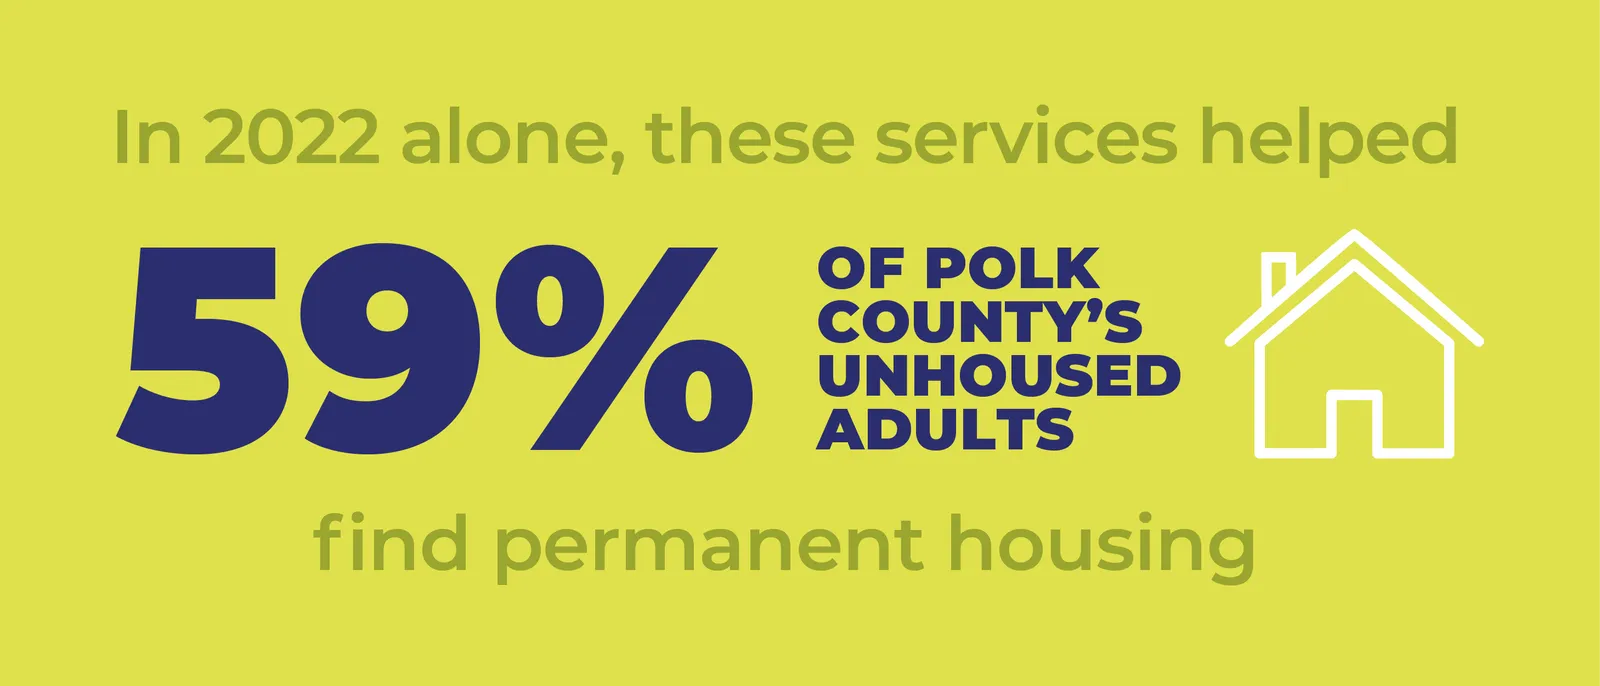 These services helped 59% of Polk County's unhoused adults find permanent housing.